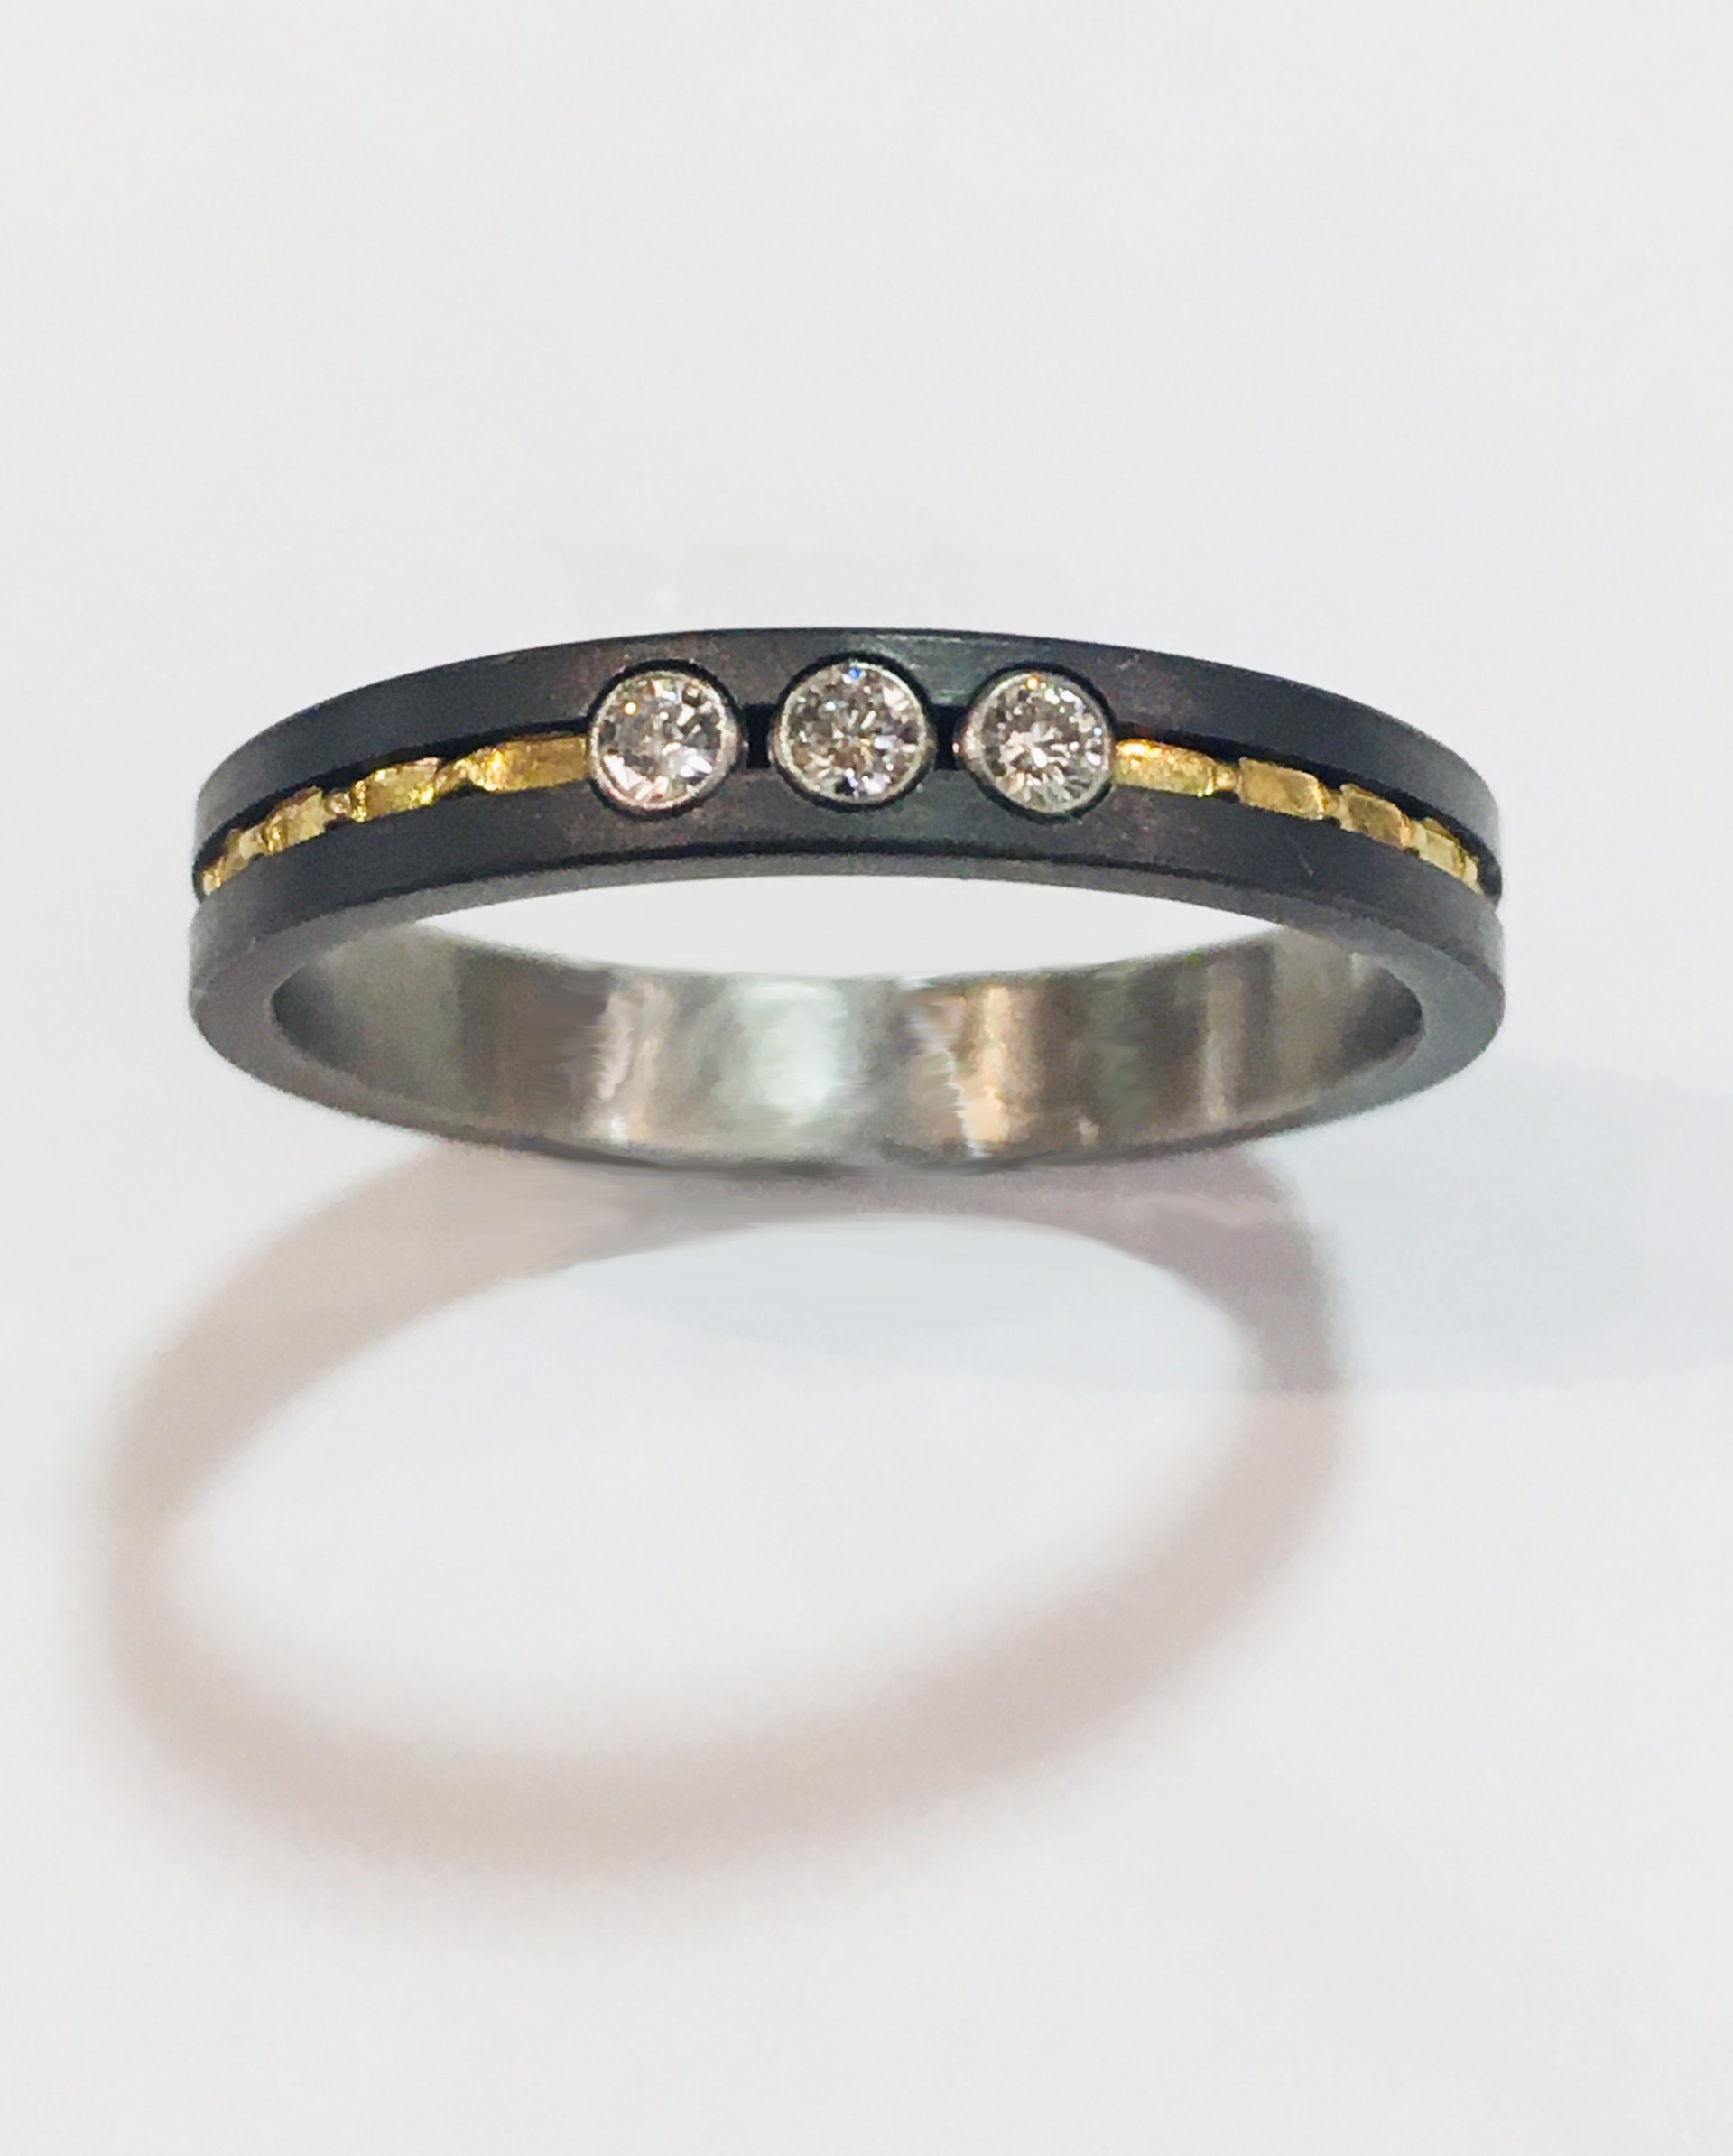 Titanium and Gold Ring with Diamonds by WES & GOLD